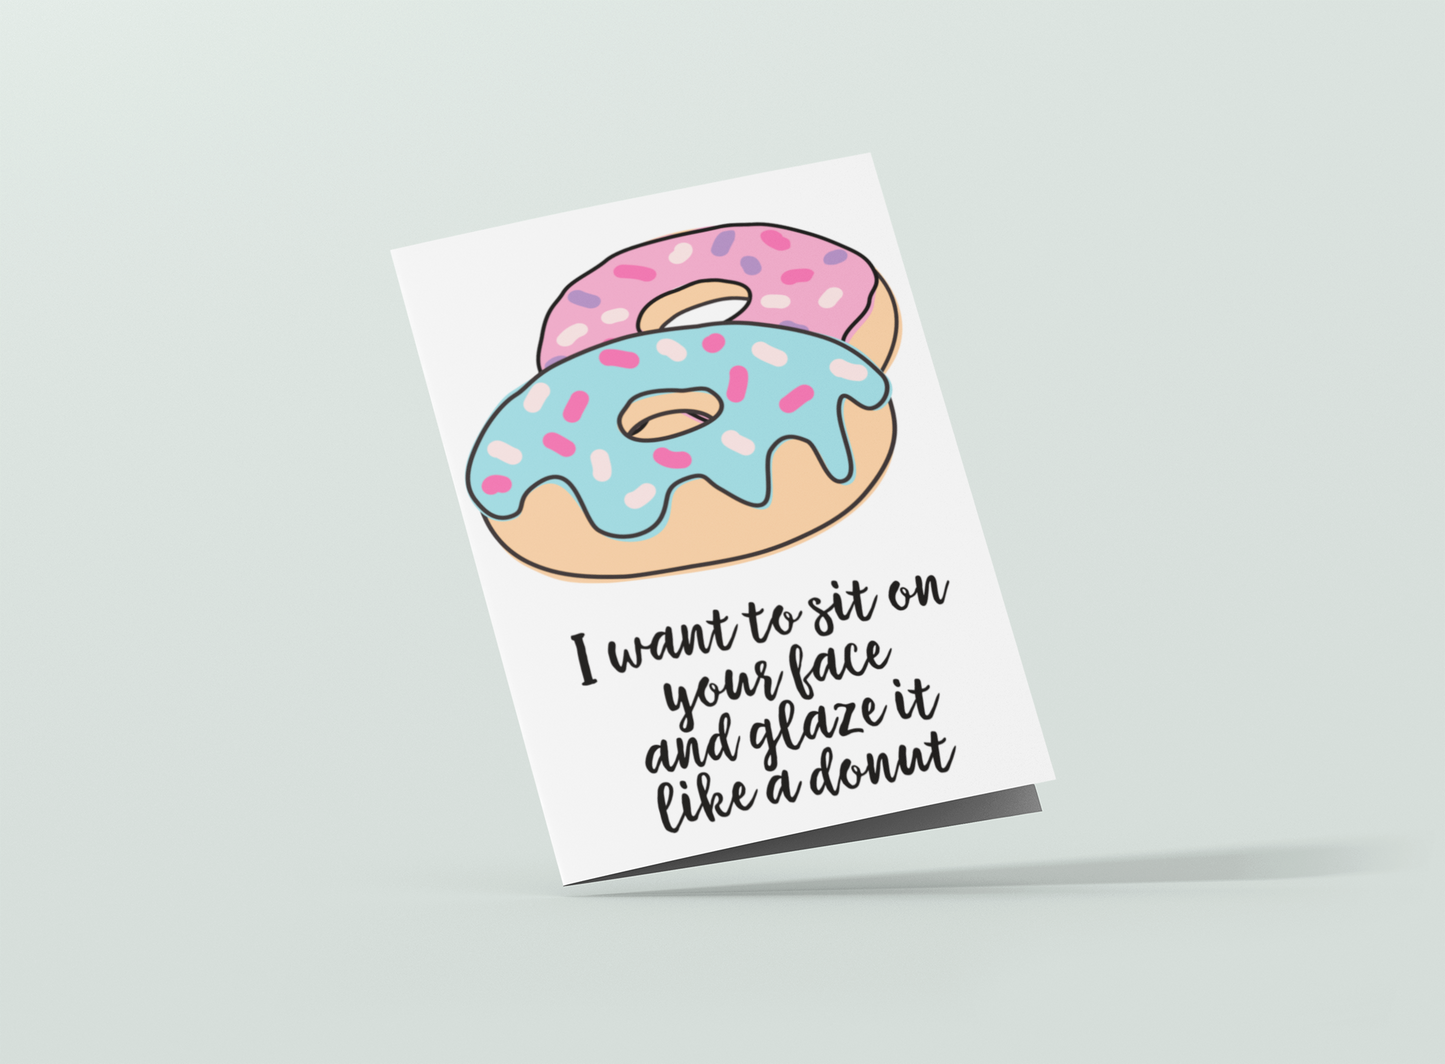 White vertical greetings card featuring a colourful donut design. To the bottom it reads 'i want to sit on your face & glaze it like a donut'. Printed in black ink.